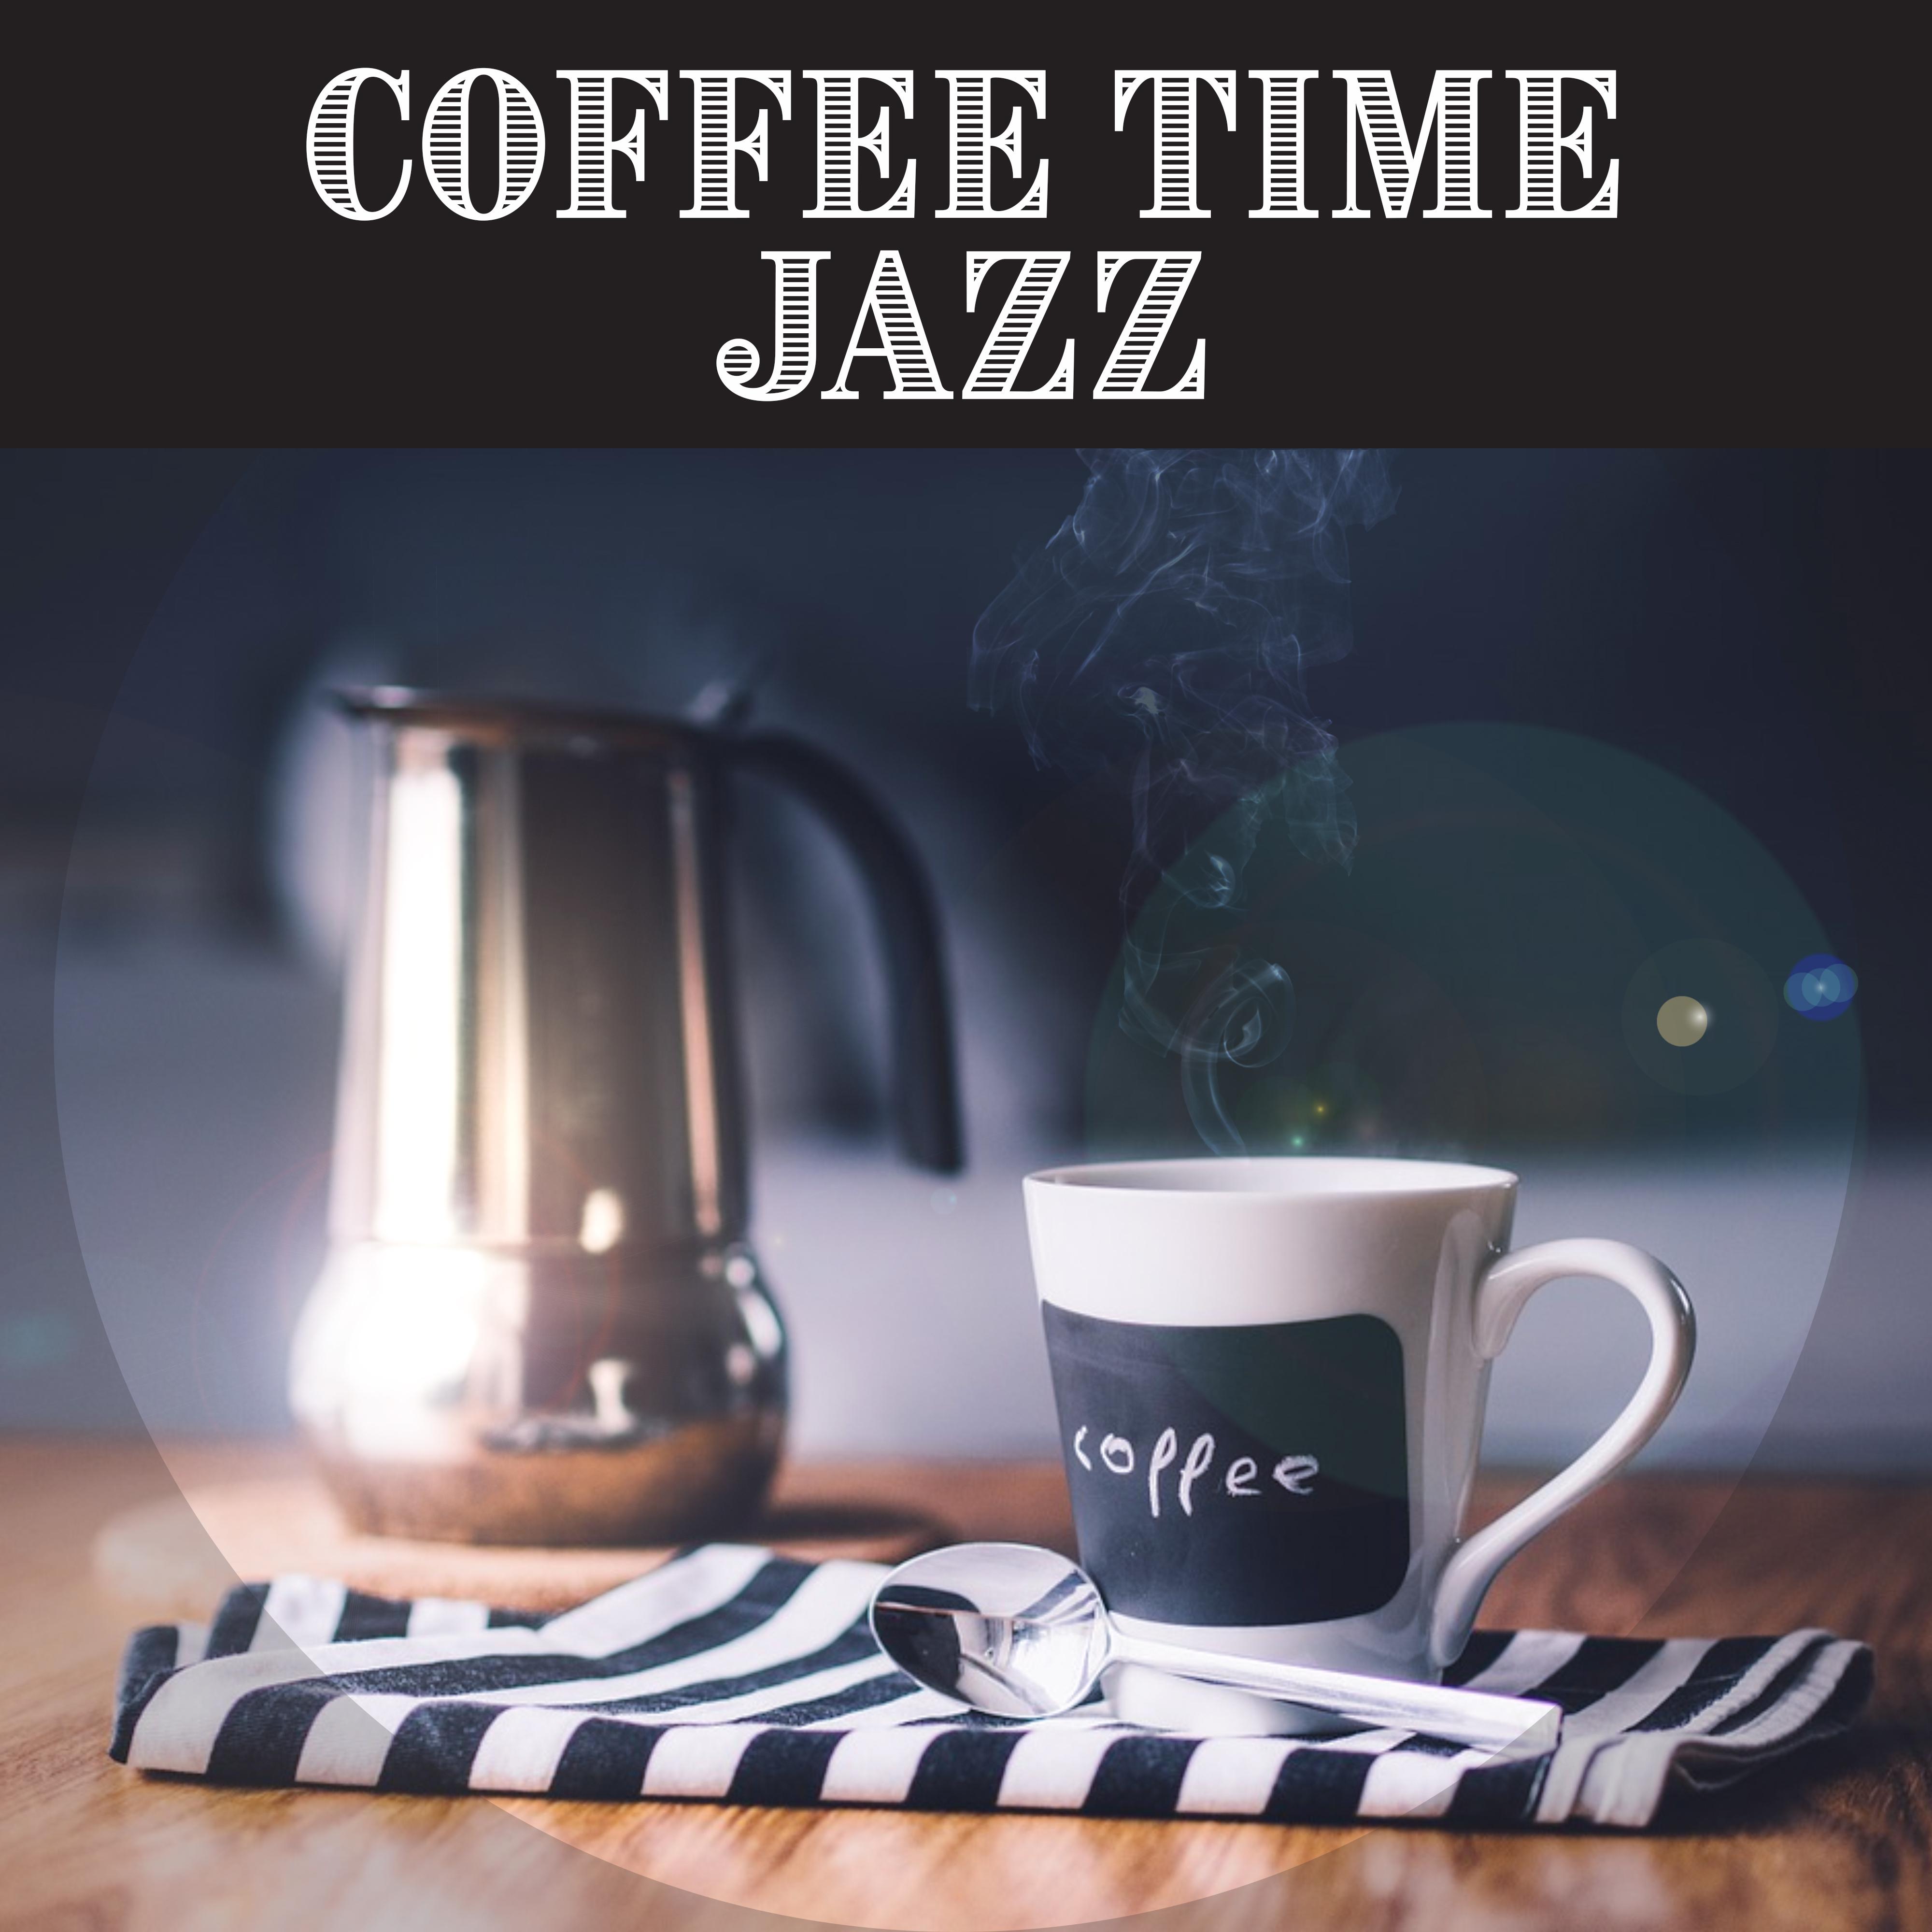 Coffee Time Jazz  Smooth Sounds of Jazz Music, Best Background to Cafe  Restaurant, Soothing Jazz Music, Coffee Talk, Good Mood